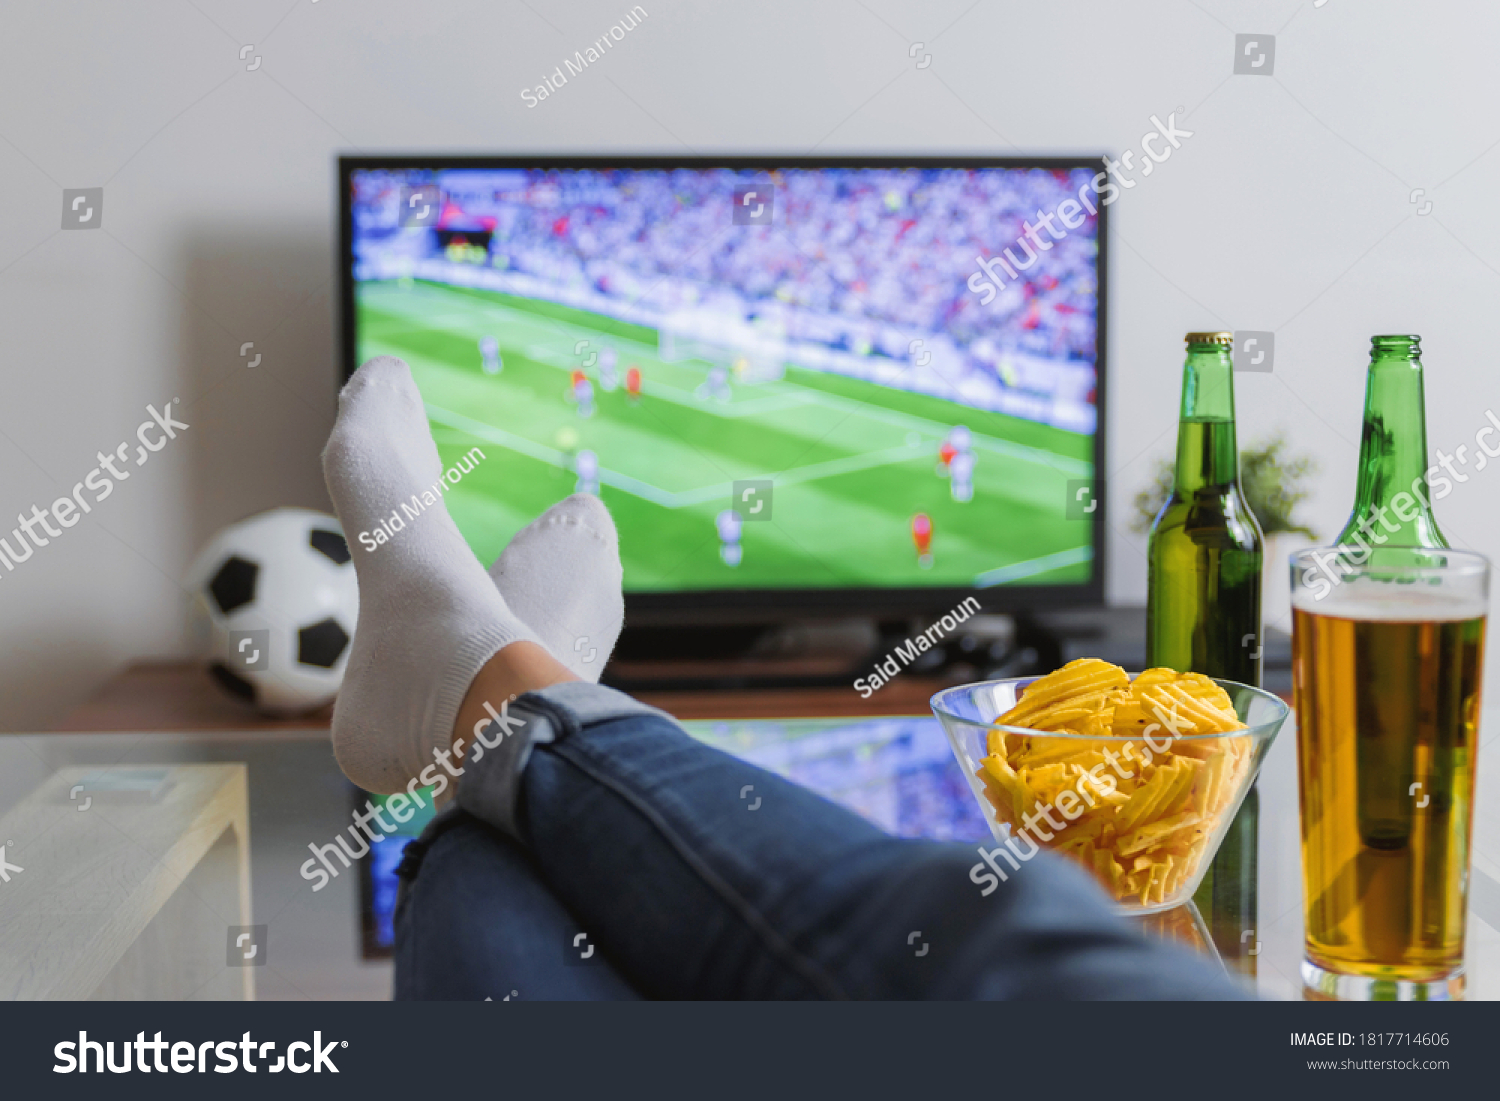 Watching a football match with feet on the table, besides drinks and snacks. #1817714606